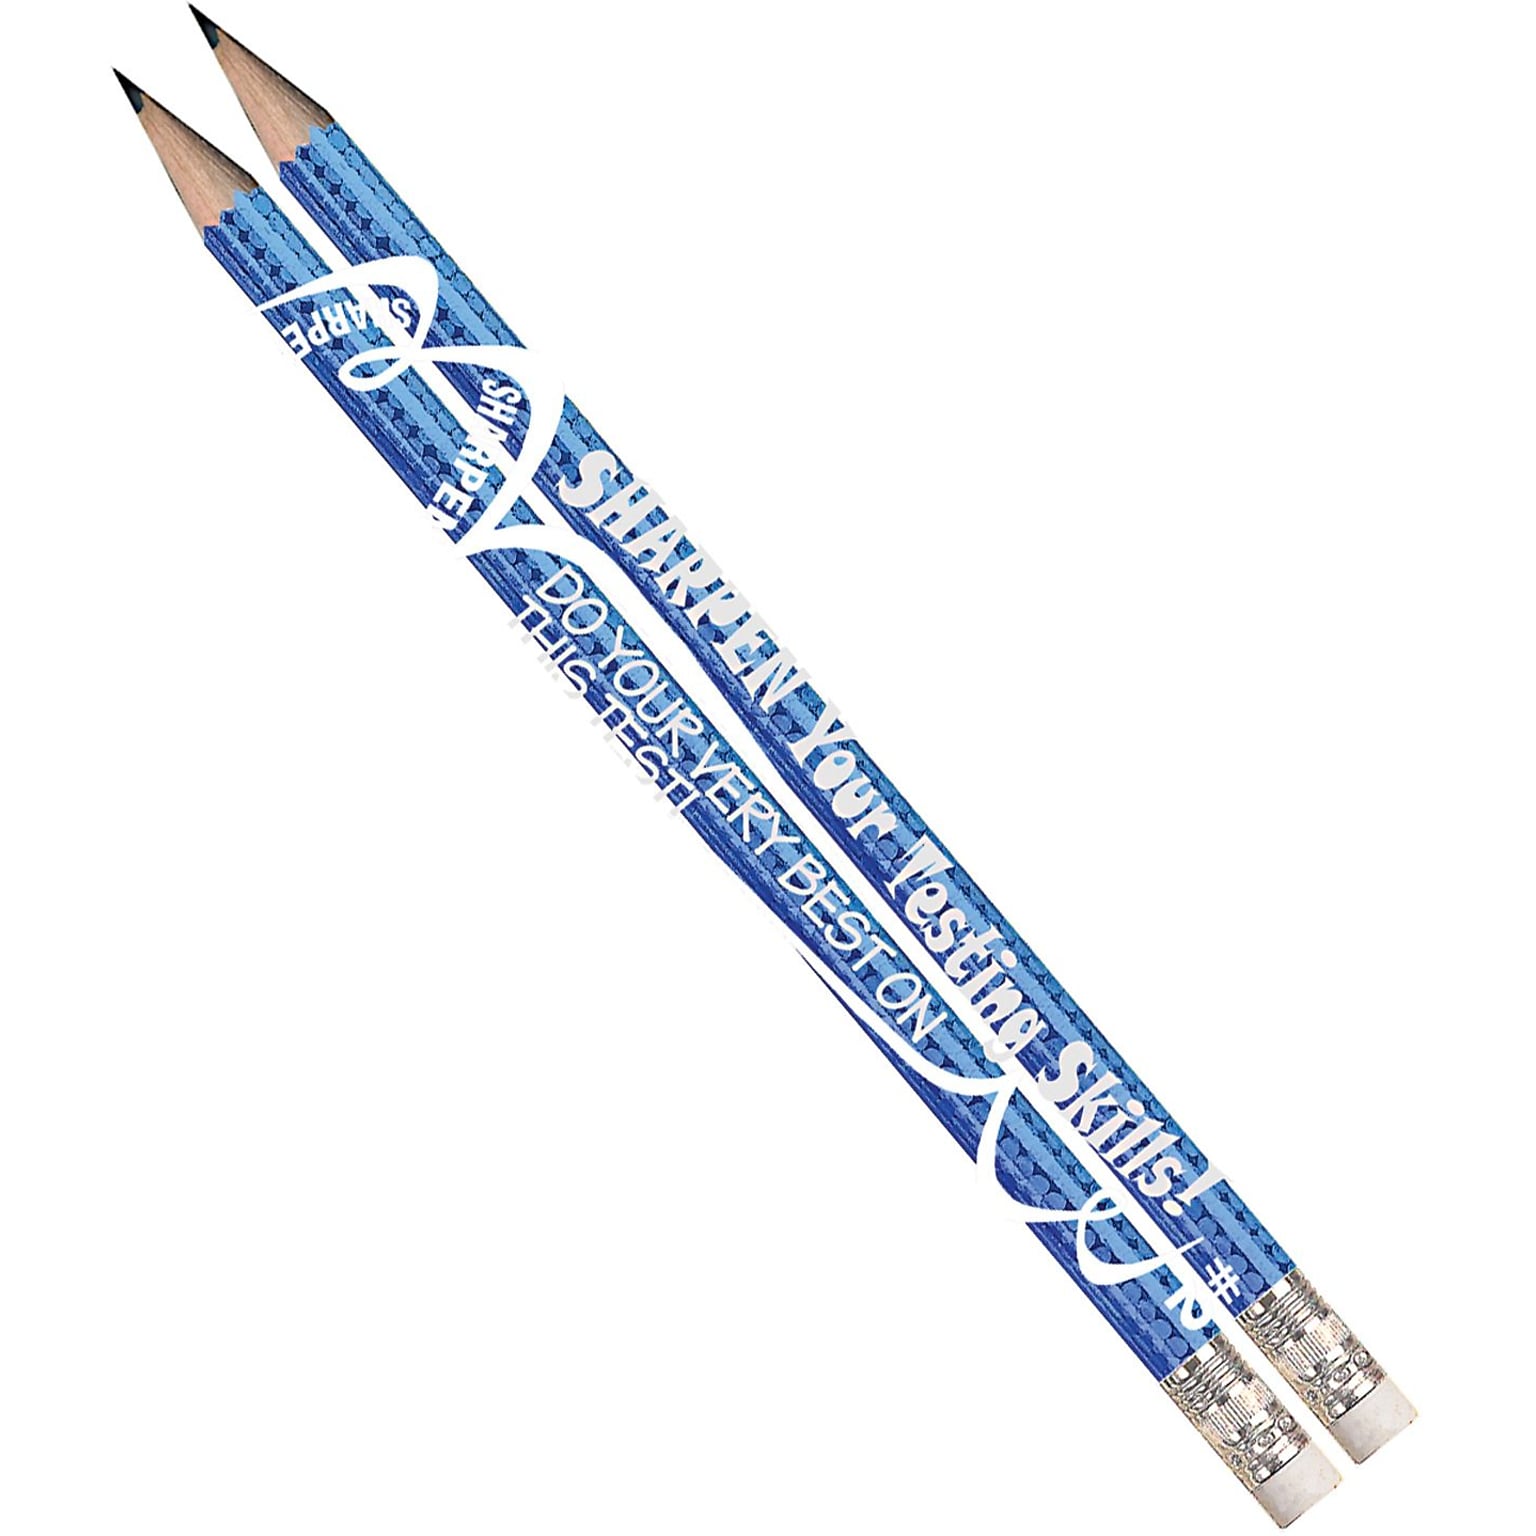 Musgrave Sharpen Your Testing Skills Motivational/Fun Pencils, Pack of 144 (MUS2458G)